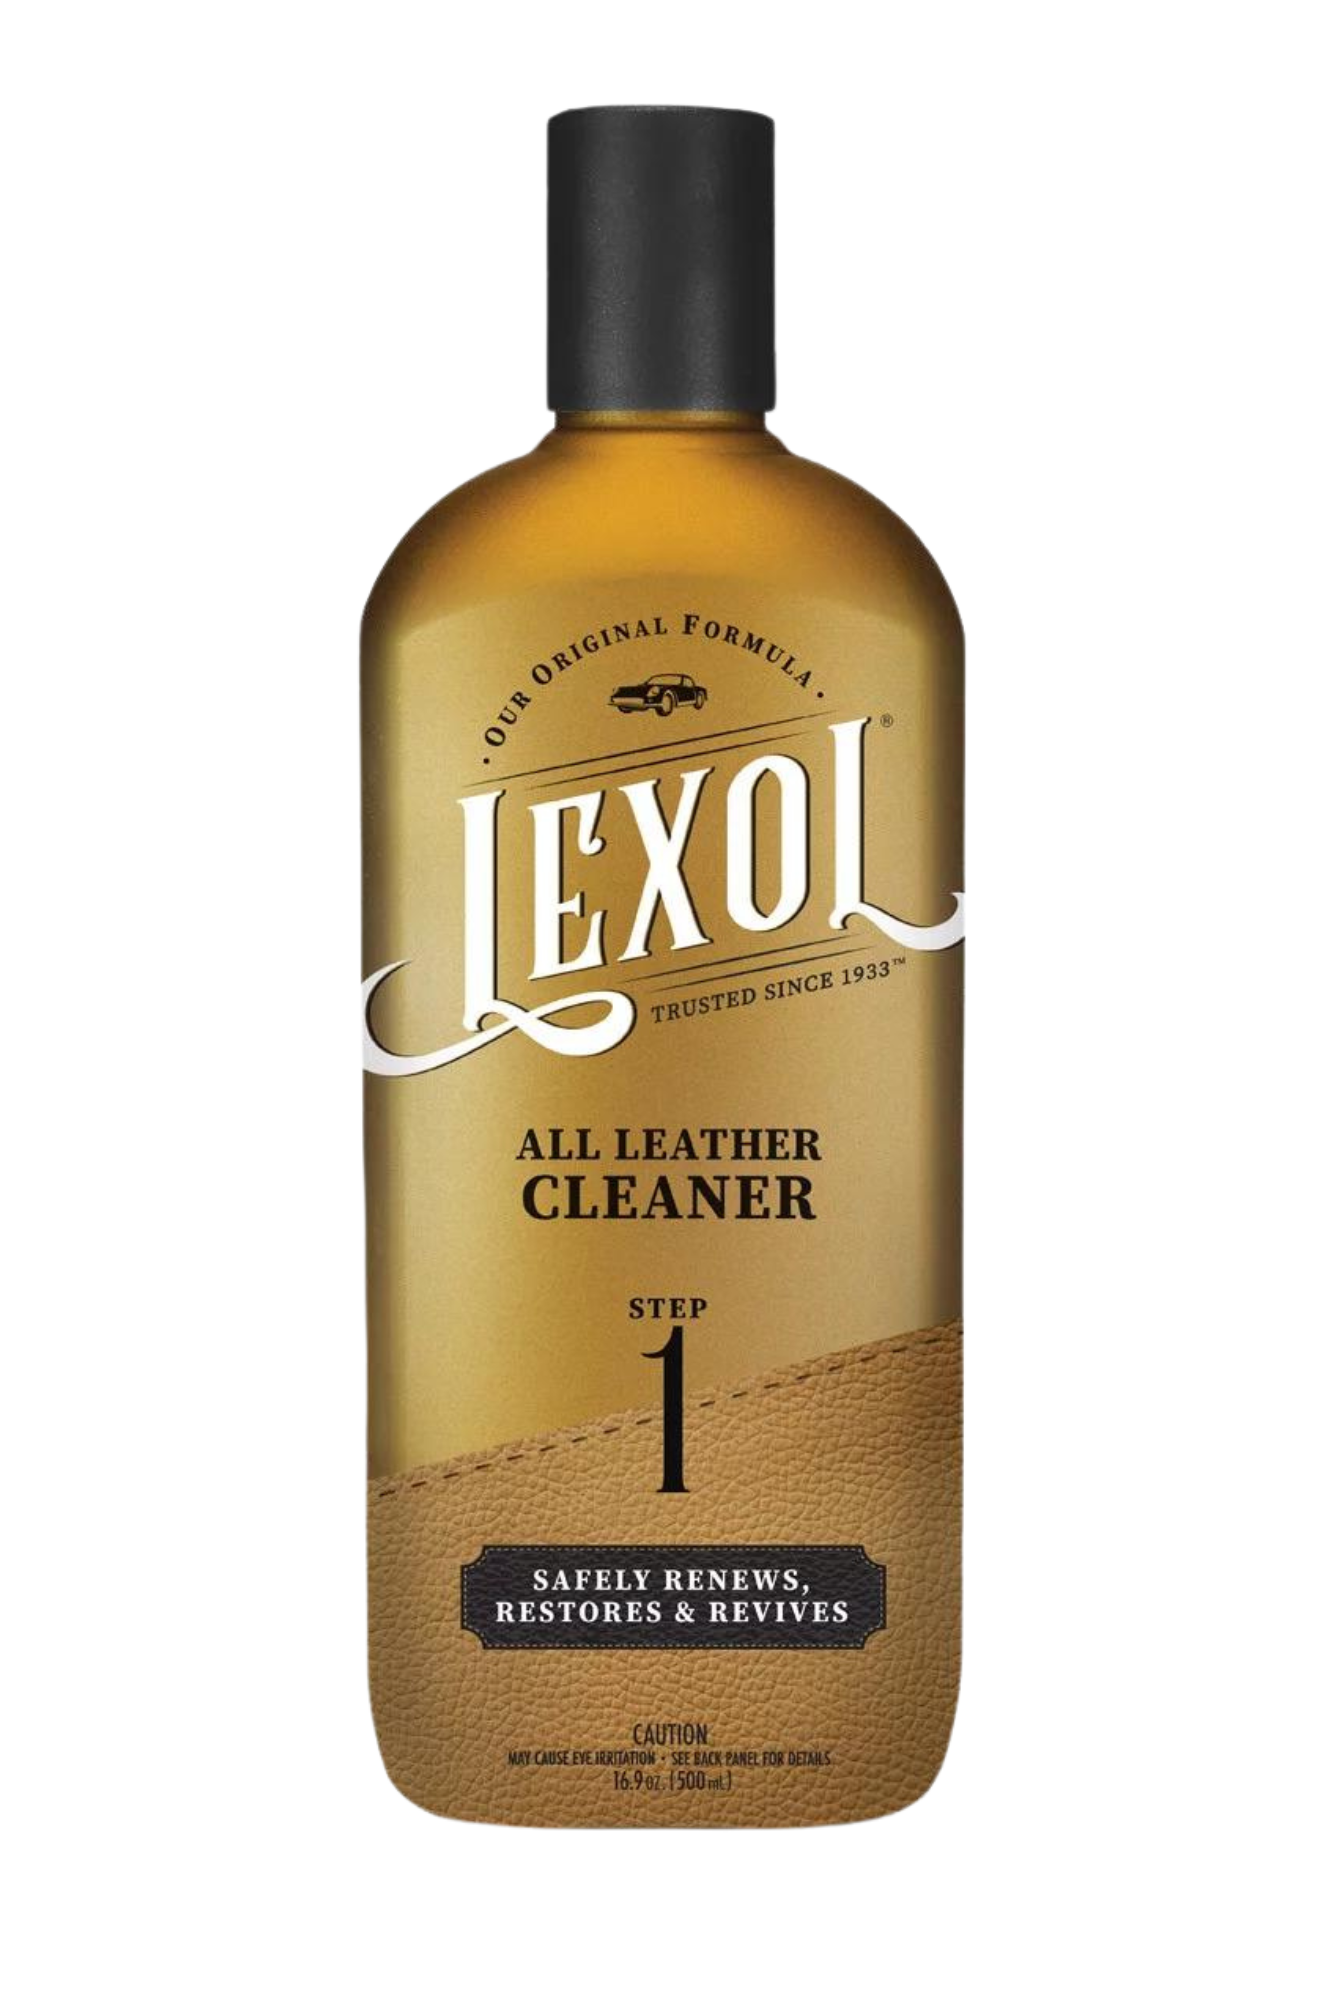 LEXOL ALL LEATHER CLEANER